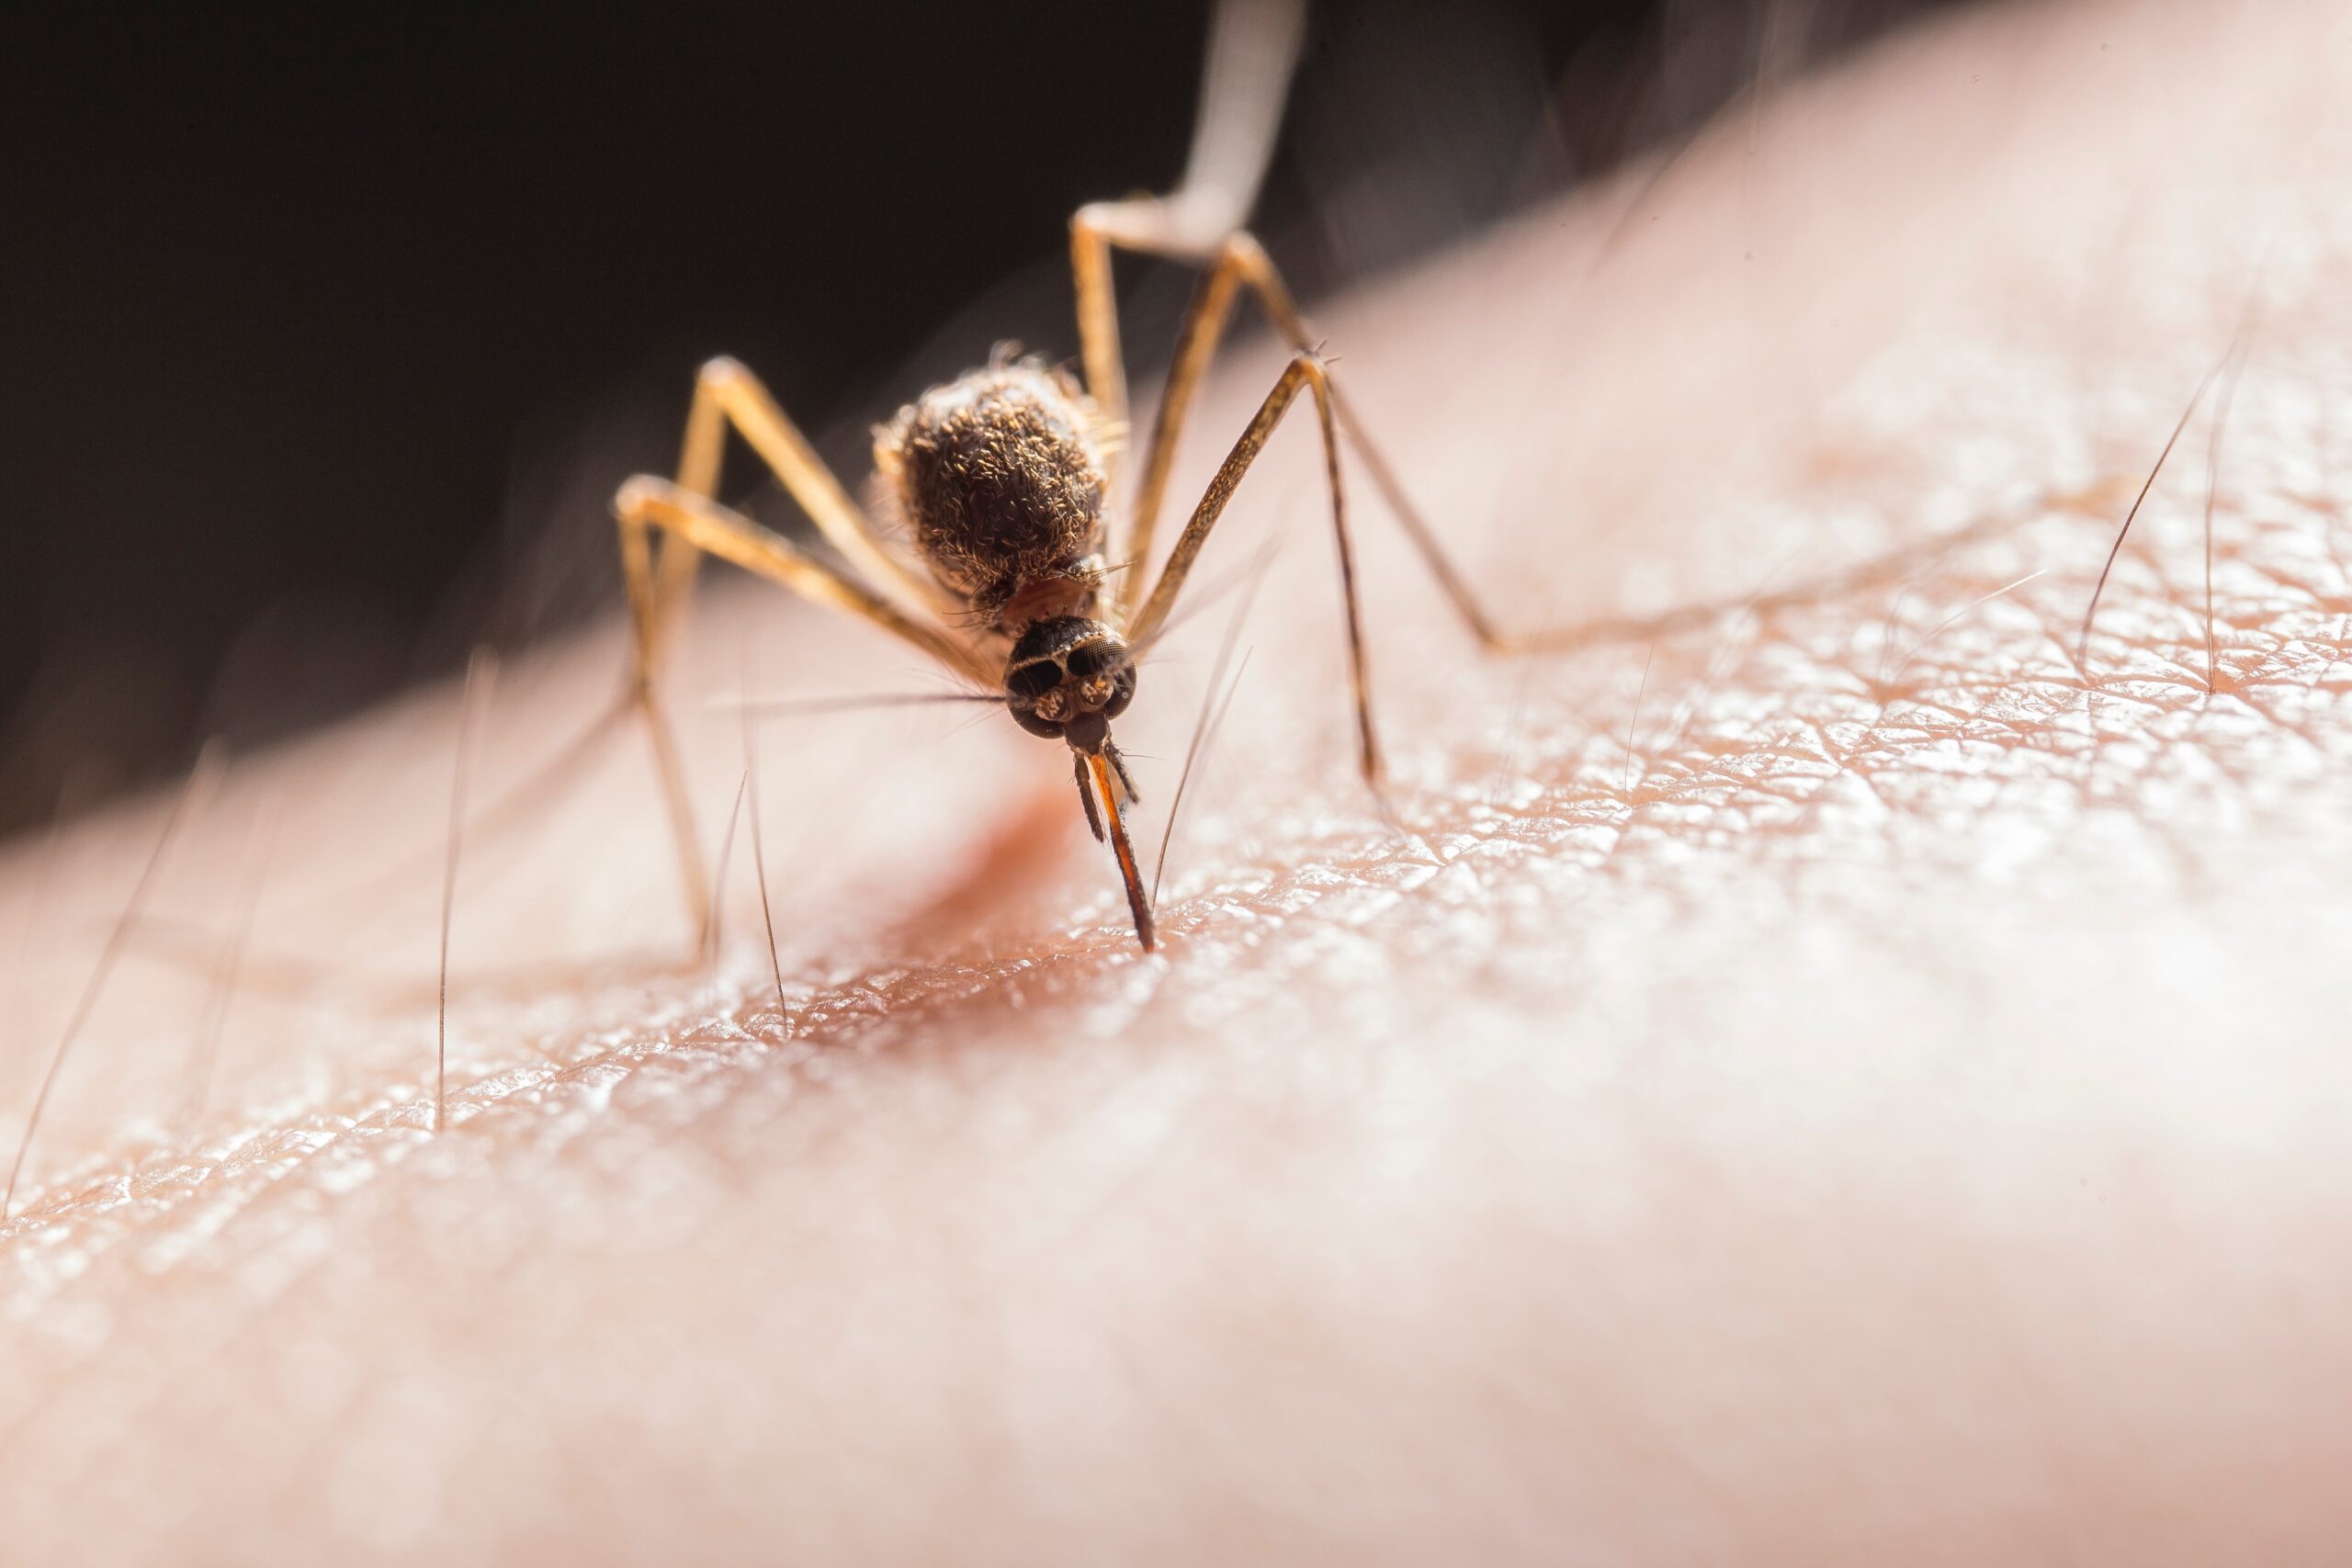 earth's deadliest creature, a mosquito biting a person